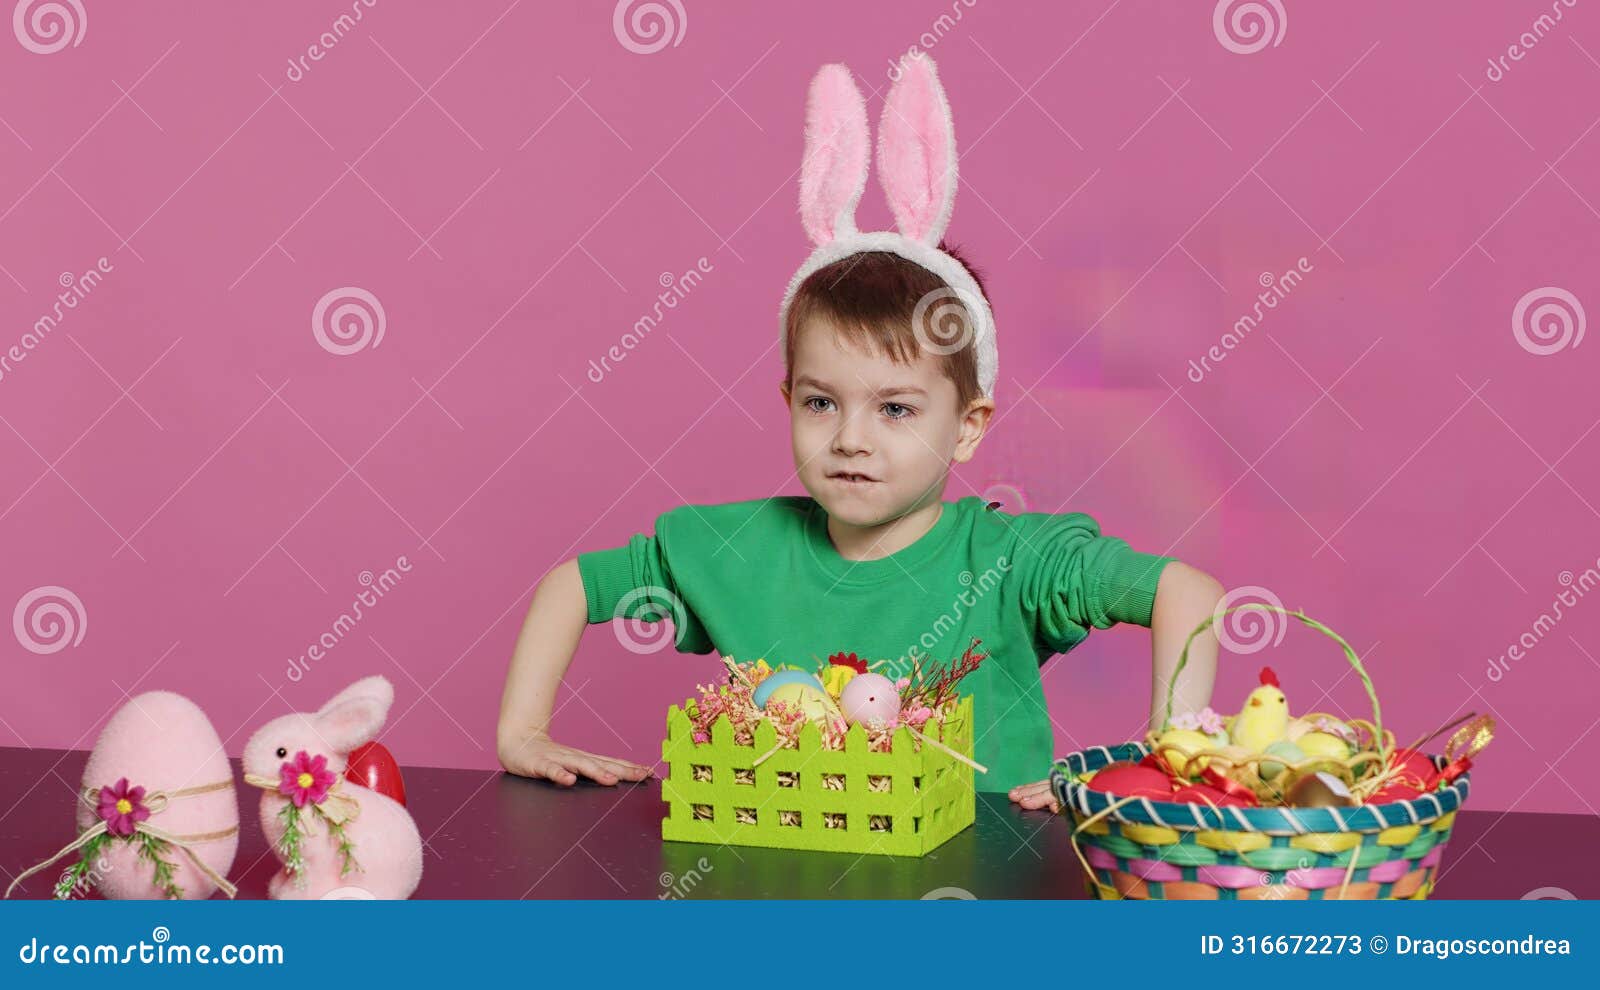 sweet young boy making colorful arrangements for easter holiday festivity